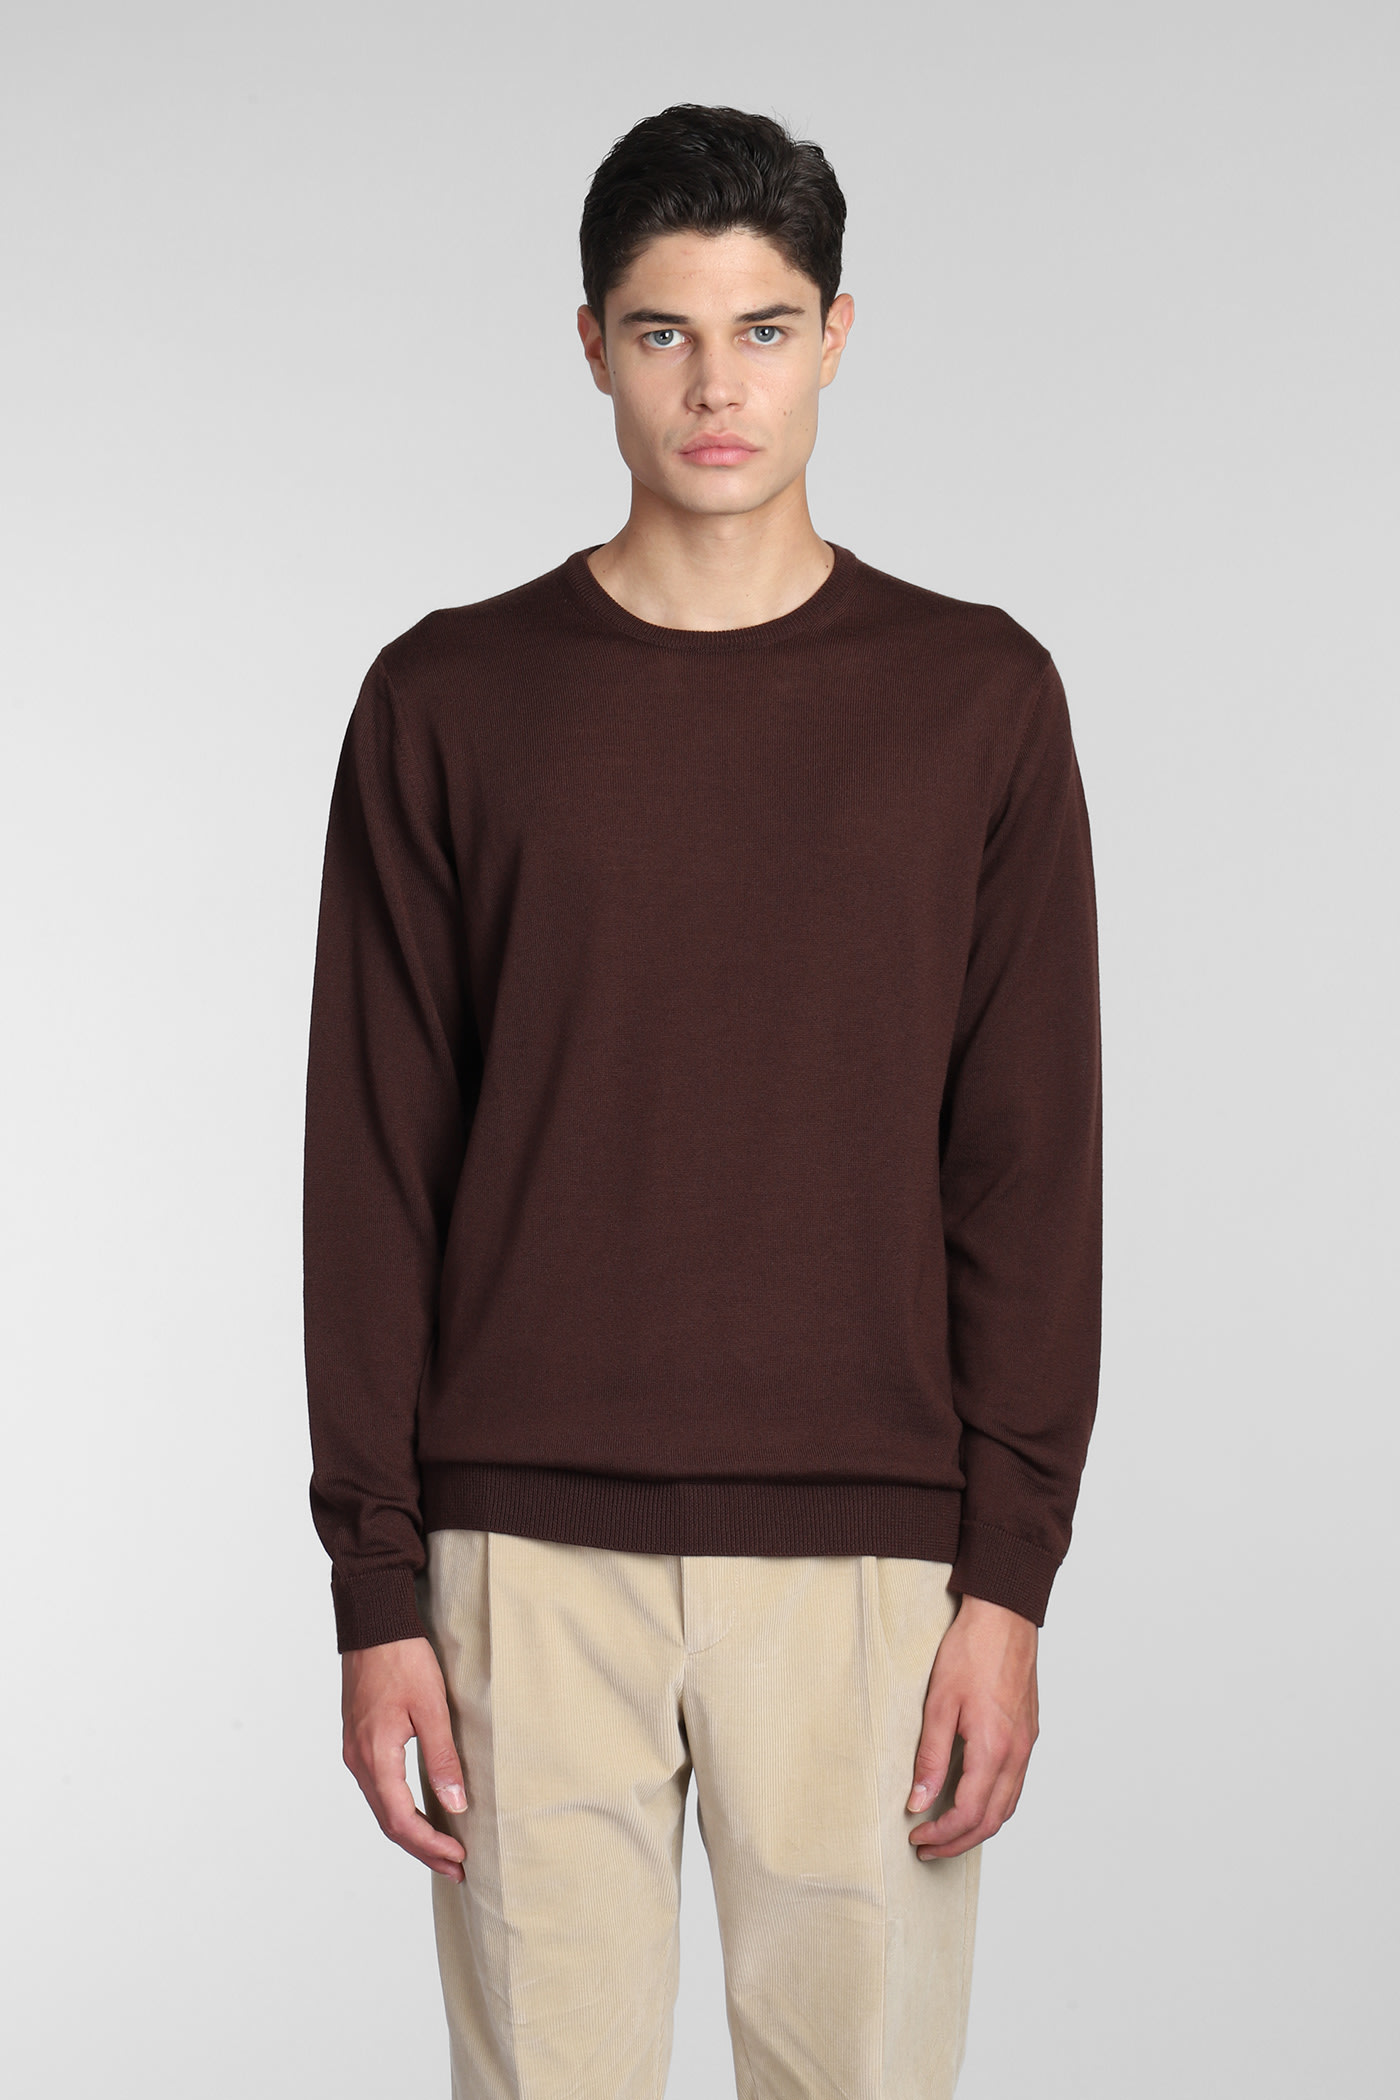 dressing gownRTO COLLINA KNITWEAR IN BROWN WOOL